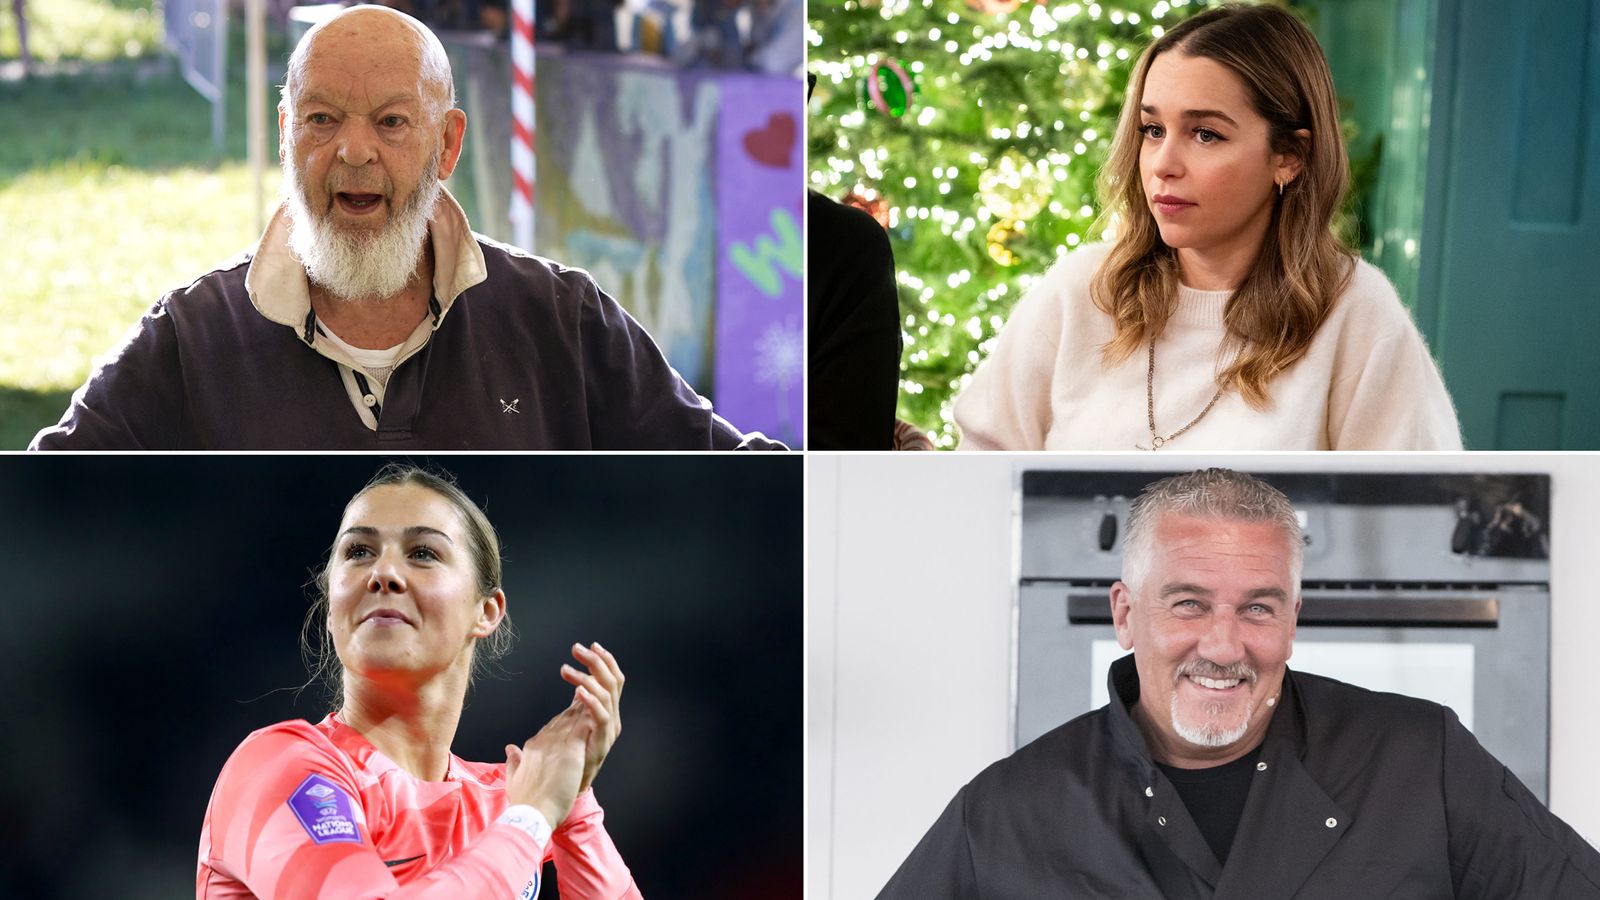 New Year Honours list: Michael Eavis, Emilia Clarke, Paul Hollywood and Mary Earps among big names included